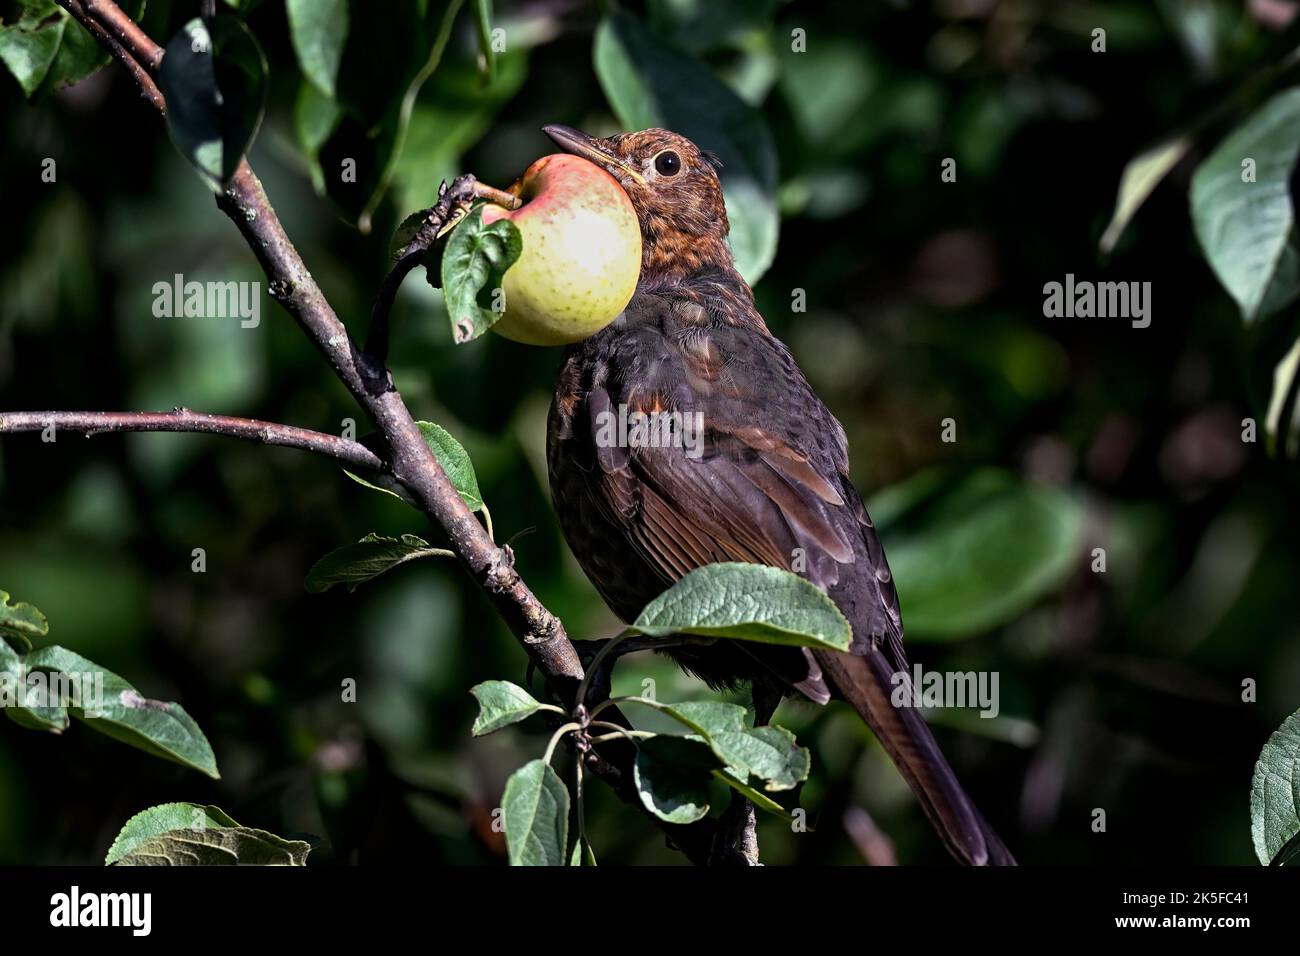 Young Blackbird and an Apple Stock Photo